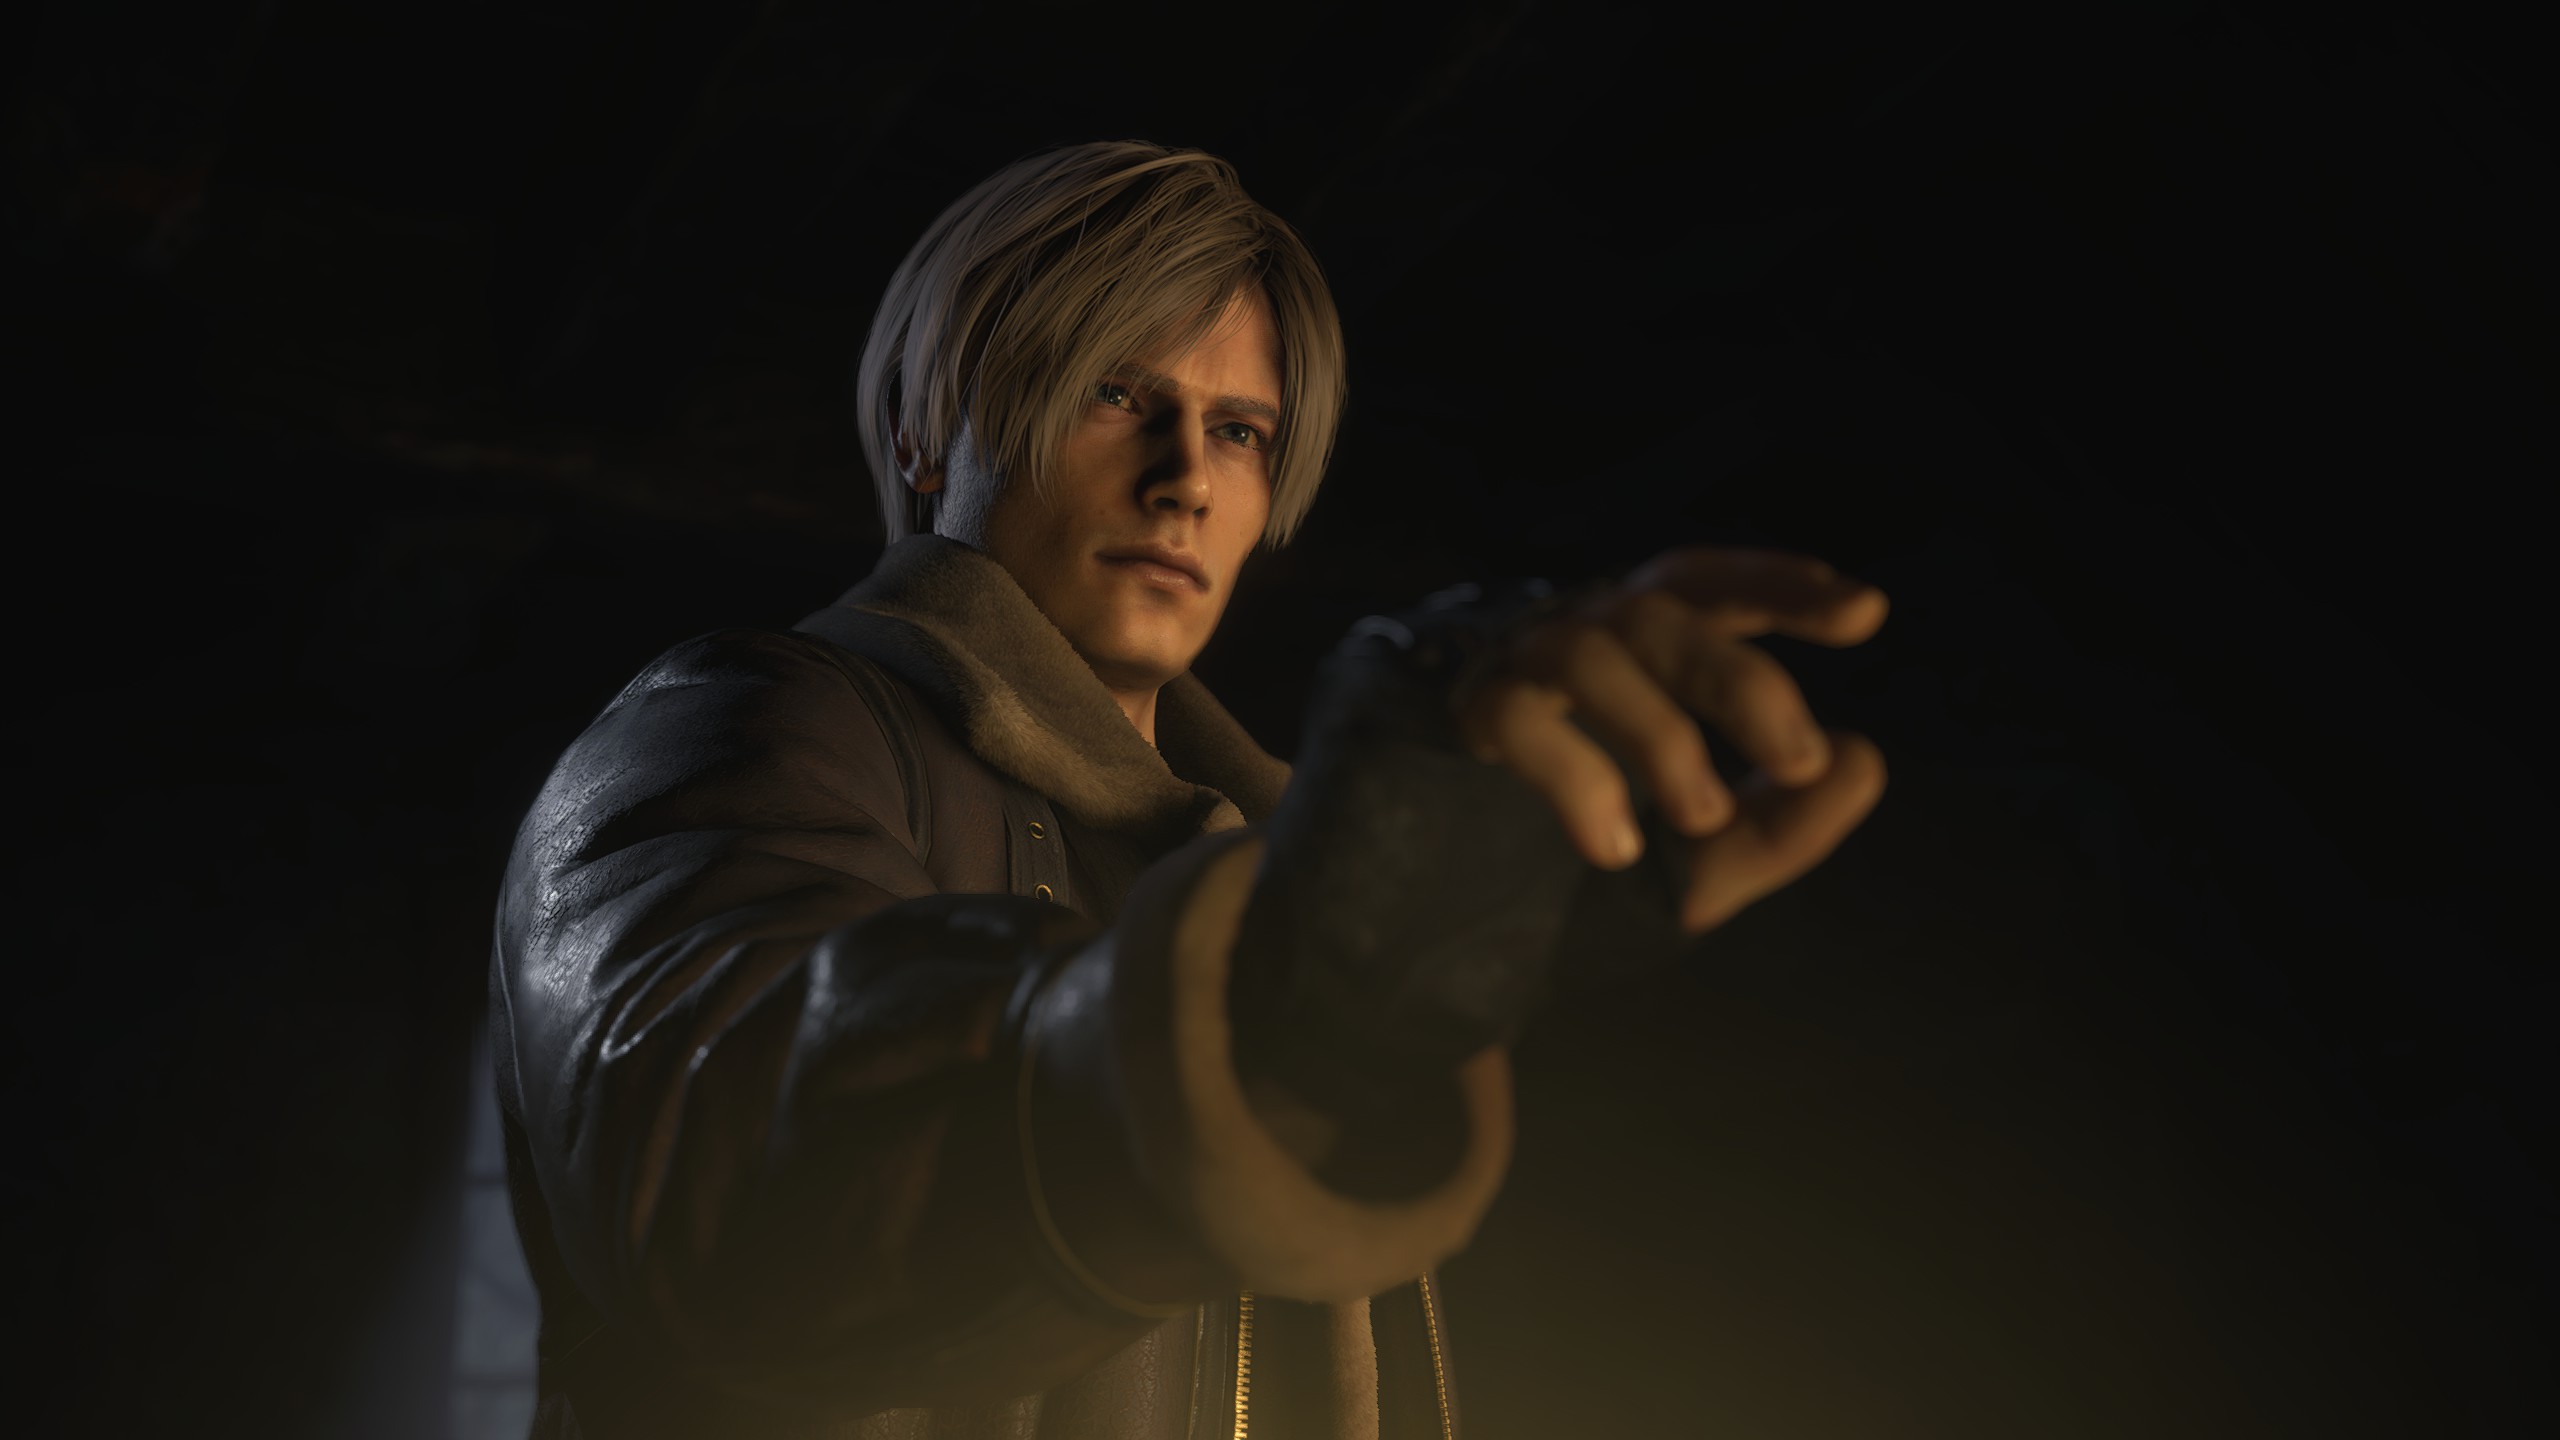 General 2560x1440 Leon S. Kennedy Resident Evil resident evil 4 remake Resident Evil 4 video games video game characters CGI video game men gloves fingerless gloves minimalism simple background